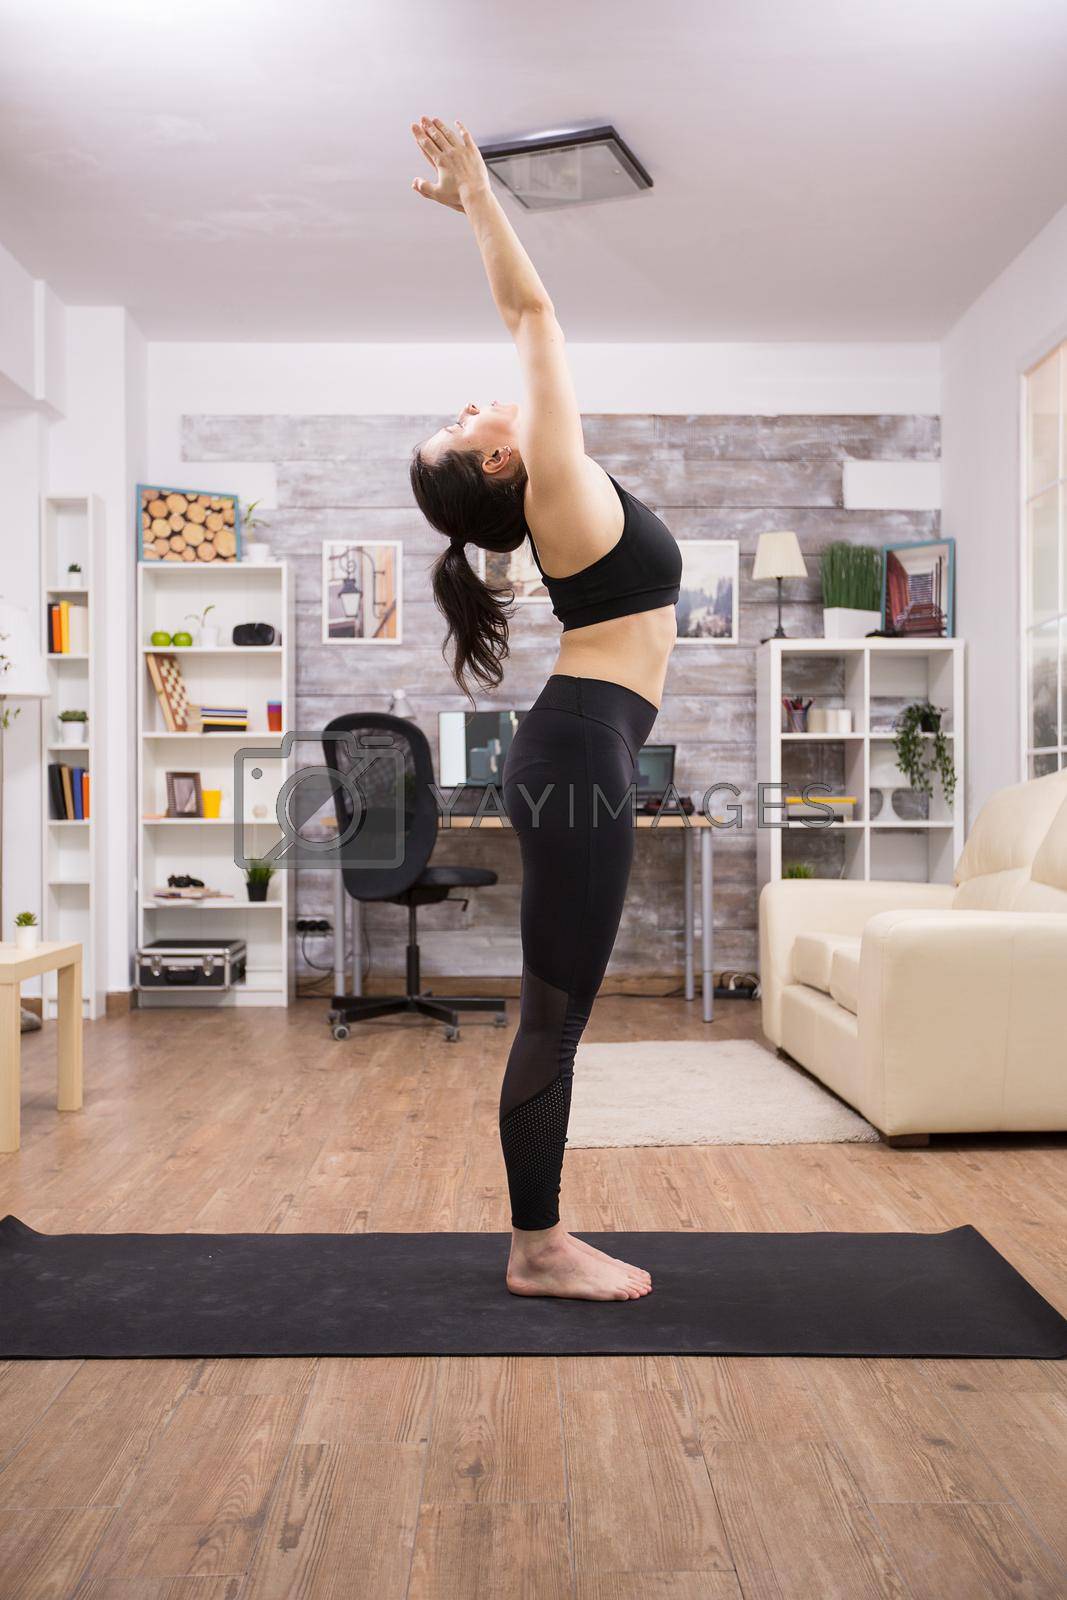 Side view of young woman doing sun yoga pose in living room wearing leggings.